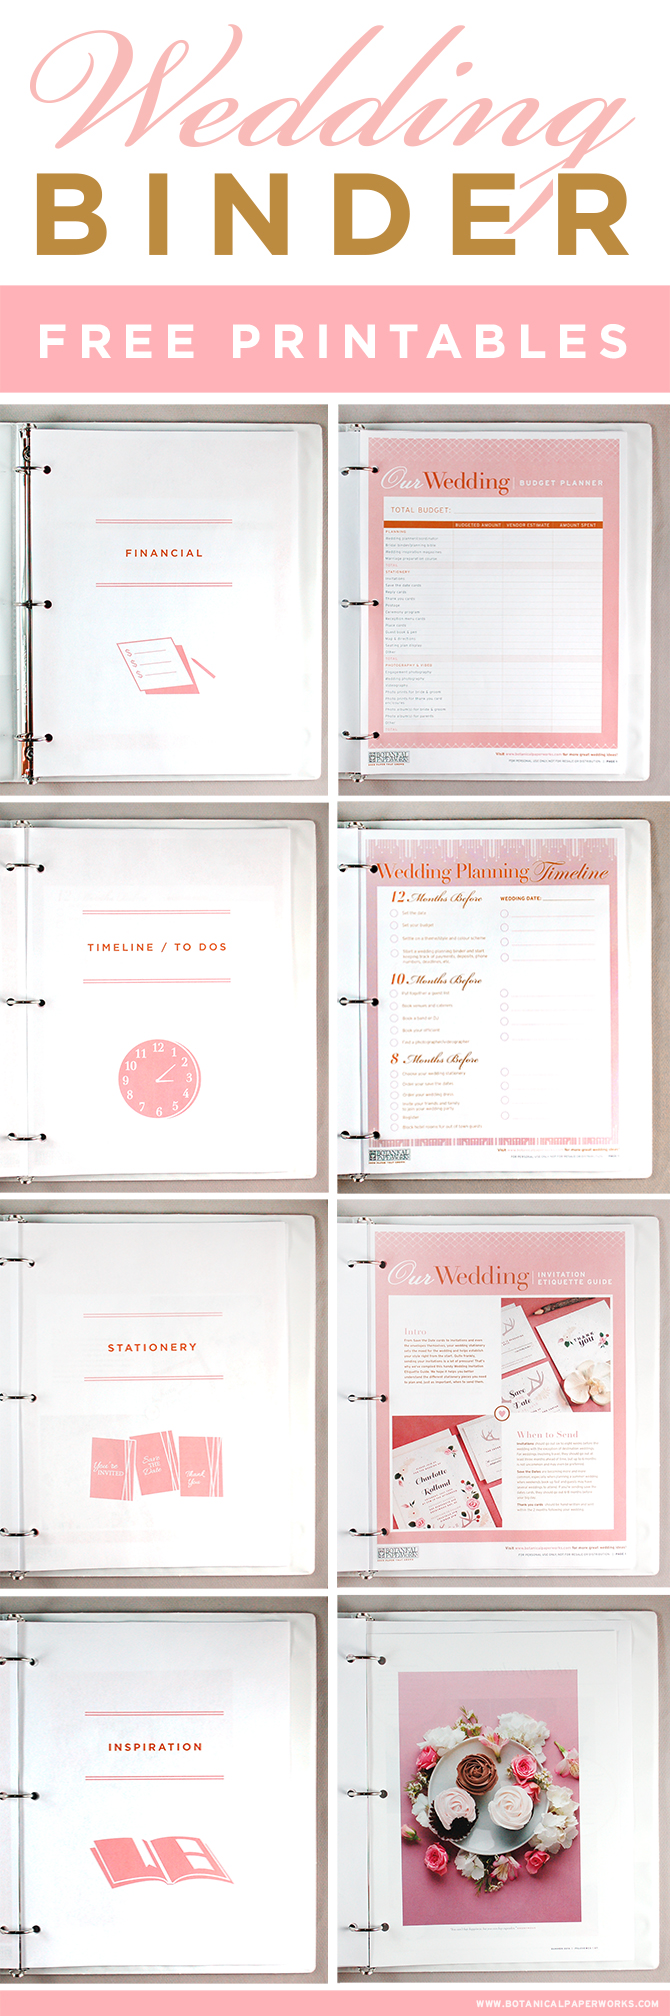 Get access to these FREE printables to help you create the wedding planning binder of your dreams!